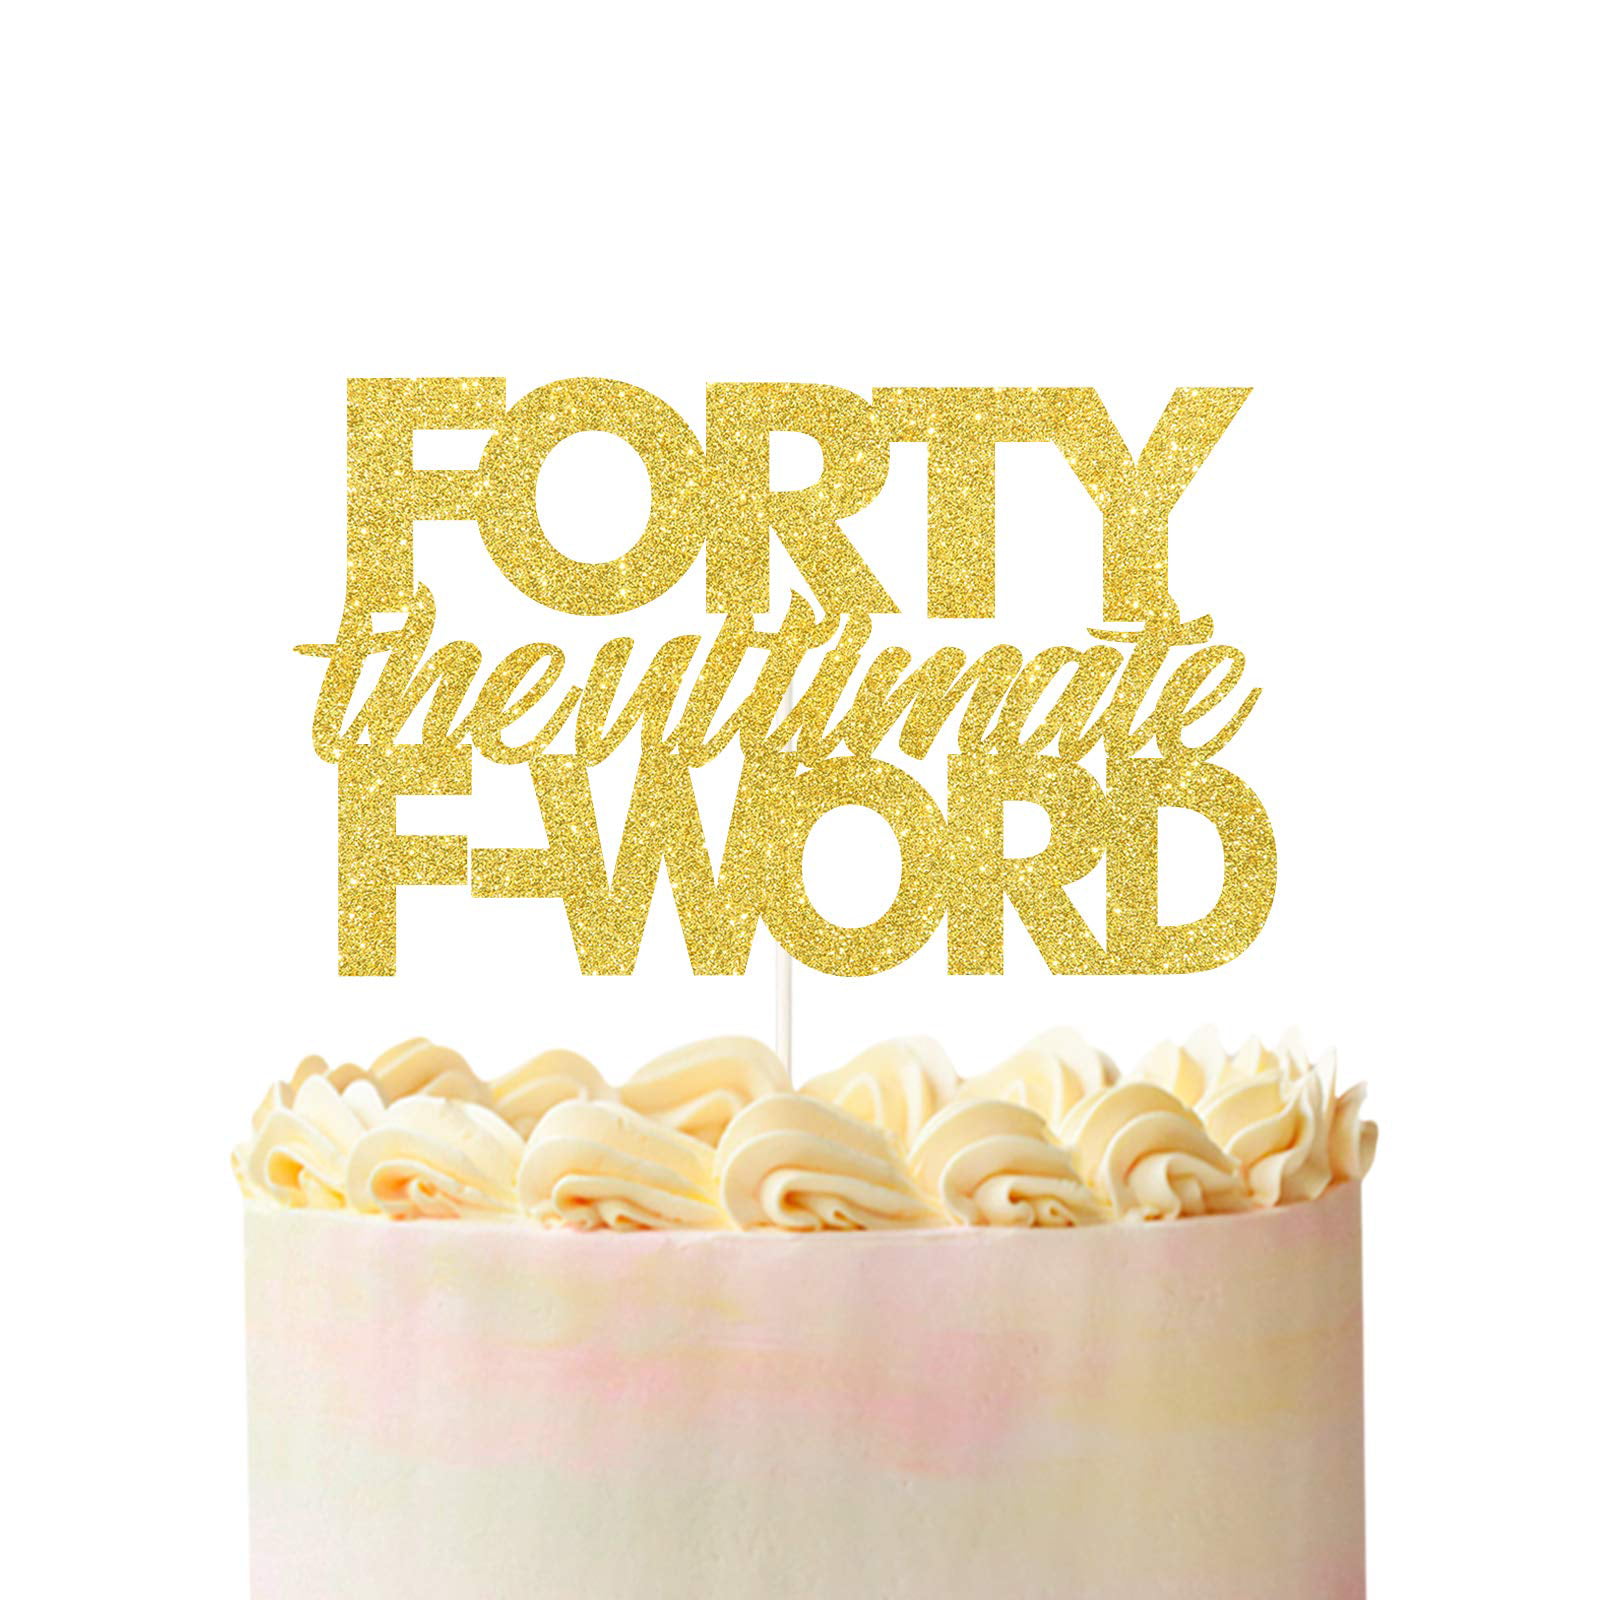 Forty The Ultimate F Word Cake Topper /Double Sided Gold Glitter Happy 40th  Birthday Cake Decor/ Funny Wedding Anniversary Party Decorations. -  